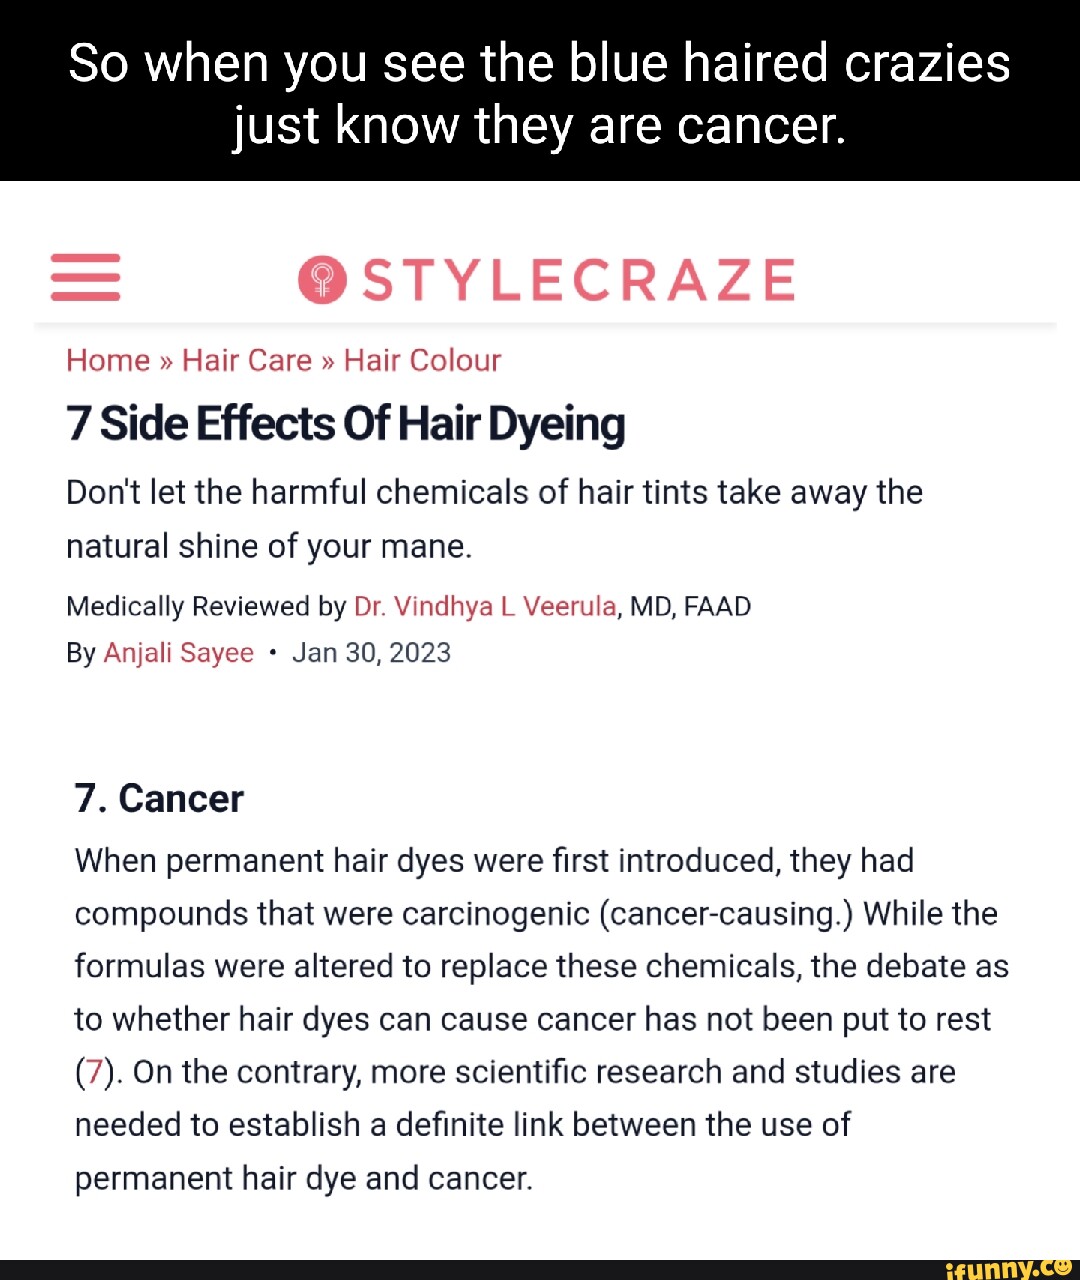 So when you see the blue haired crazies just know they are cancer. @ STYLECRAZE Home 